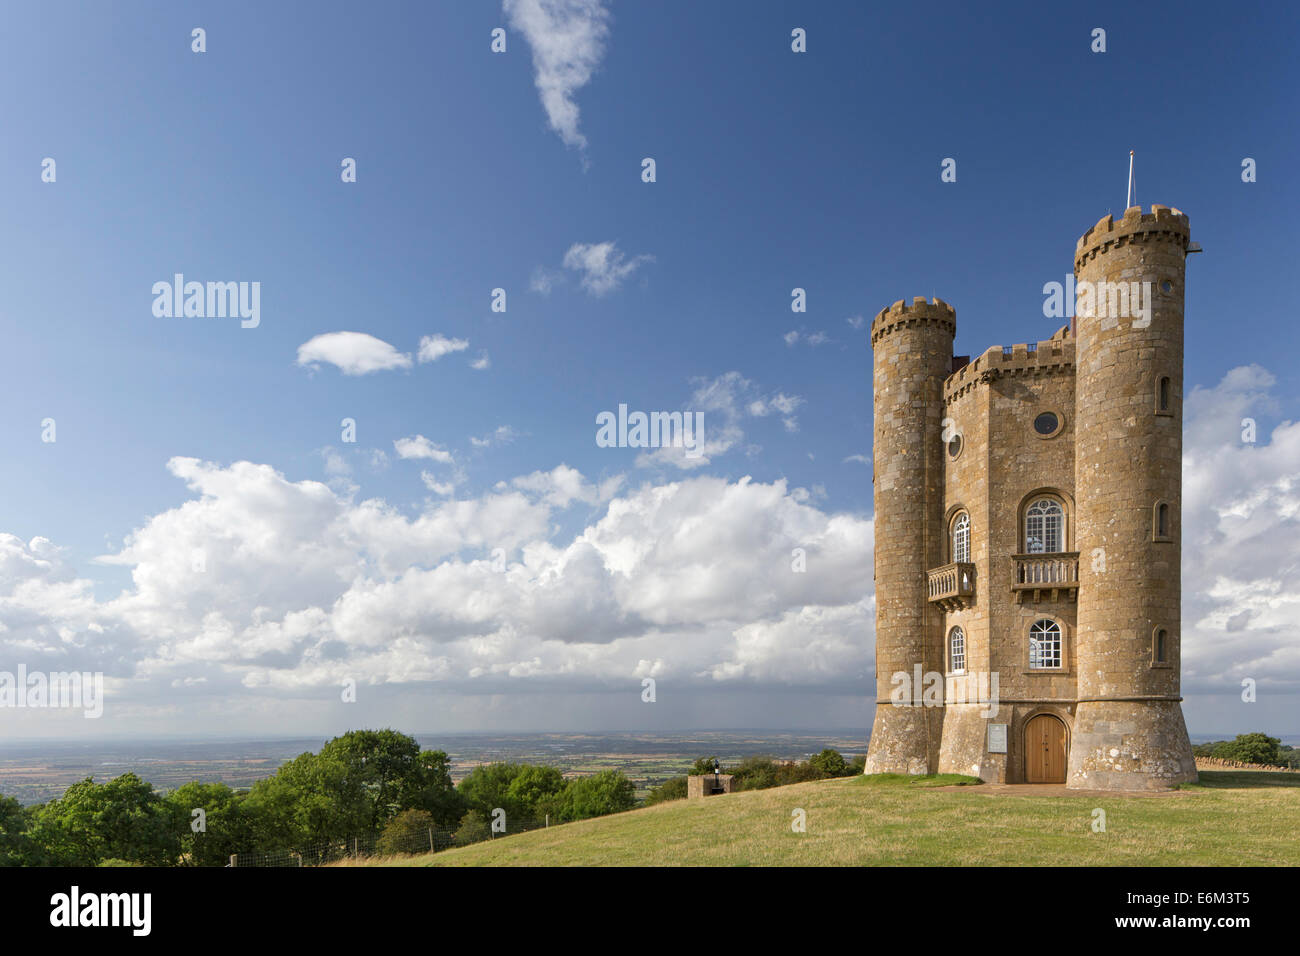 At 1,024 feet Broadway Tower is located on Broadway Hill, near the village of Broadway, Worcestershire, England, UK Stock Photo